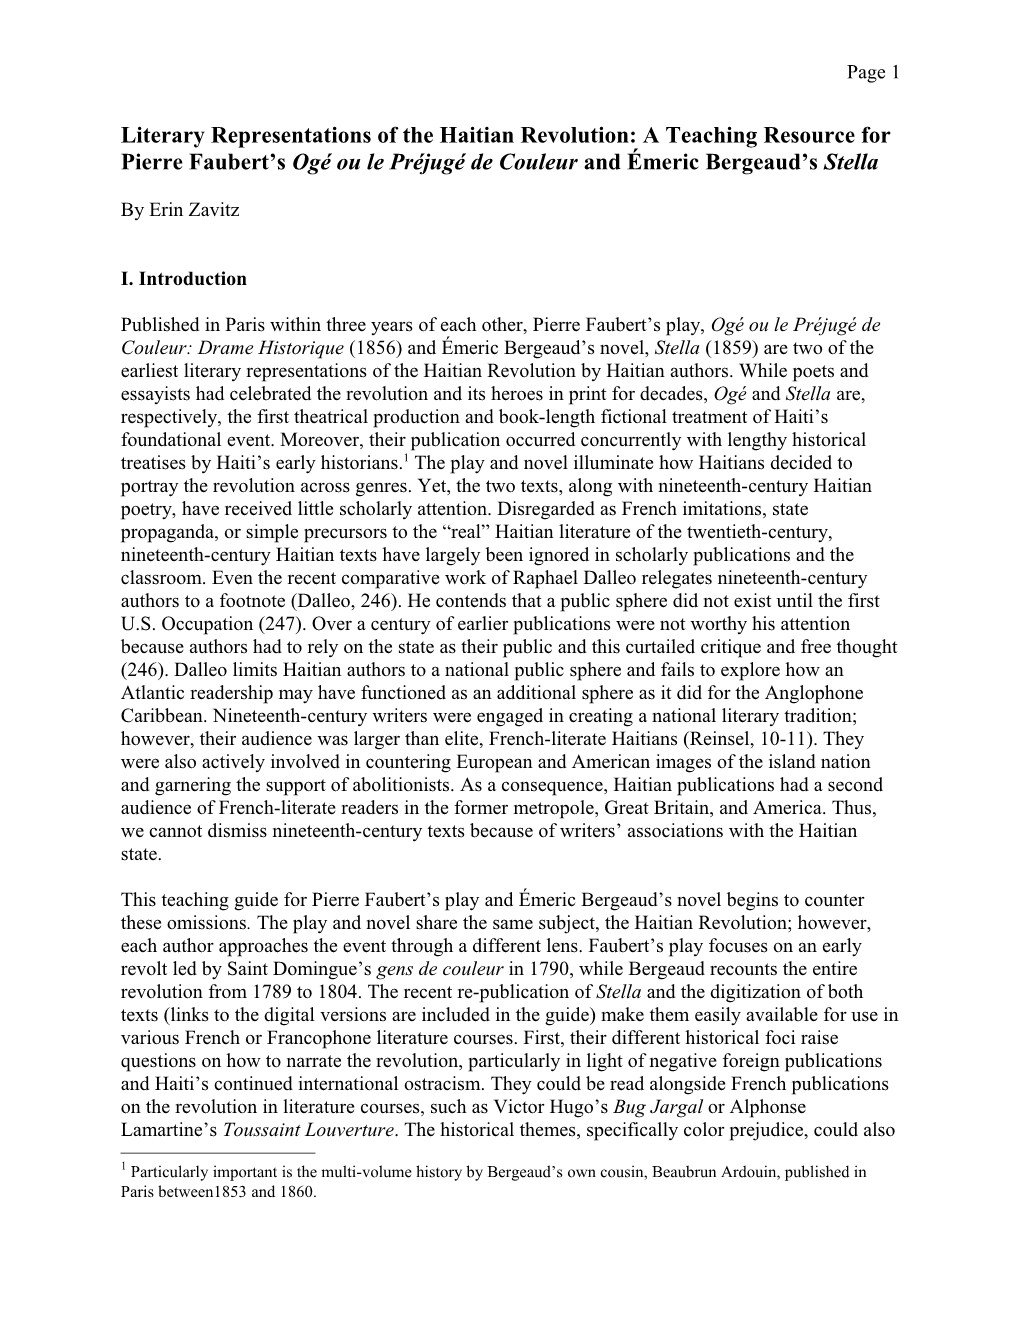 Literary Representations of the Haitian Revolution: a Teaching Resource for Pierre Faubert